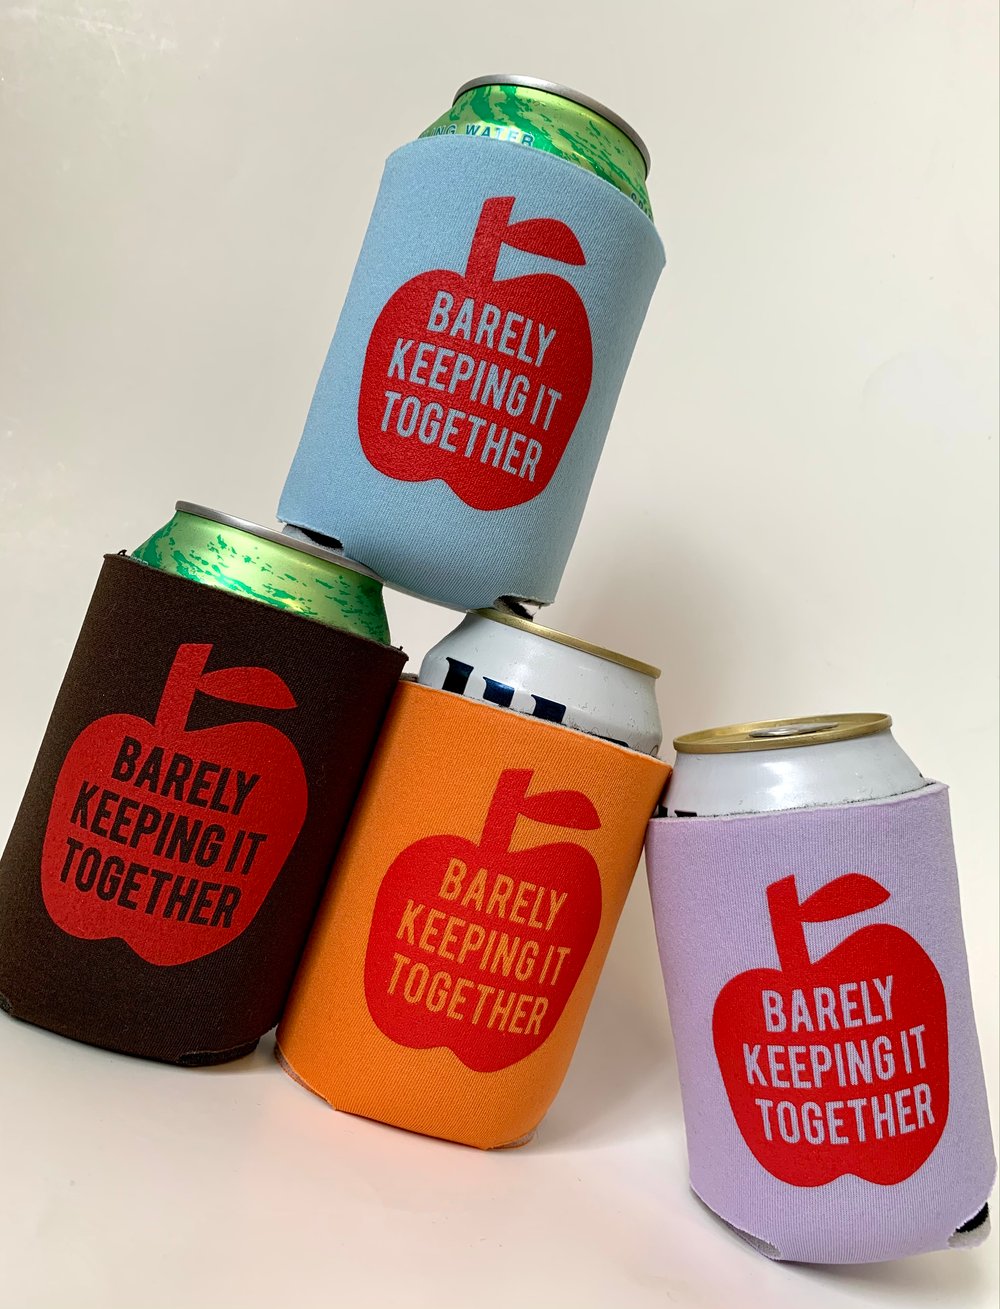 Barely Keeping it Together can cooler-4 color choices